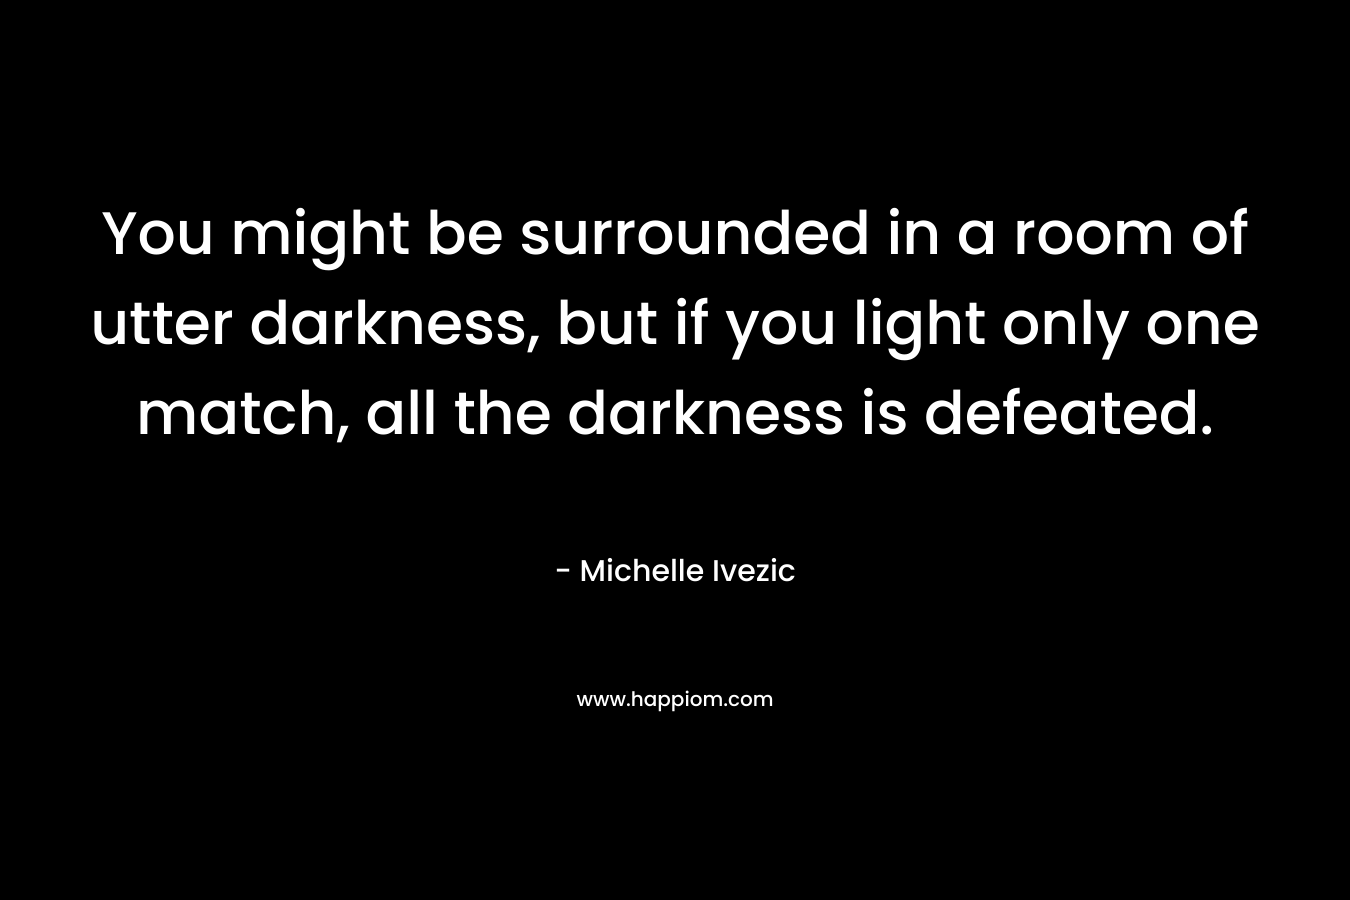 You might be surrounded in a room of utter darkness, but if you light only one match, all the darkness is defeated.